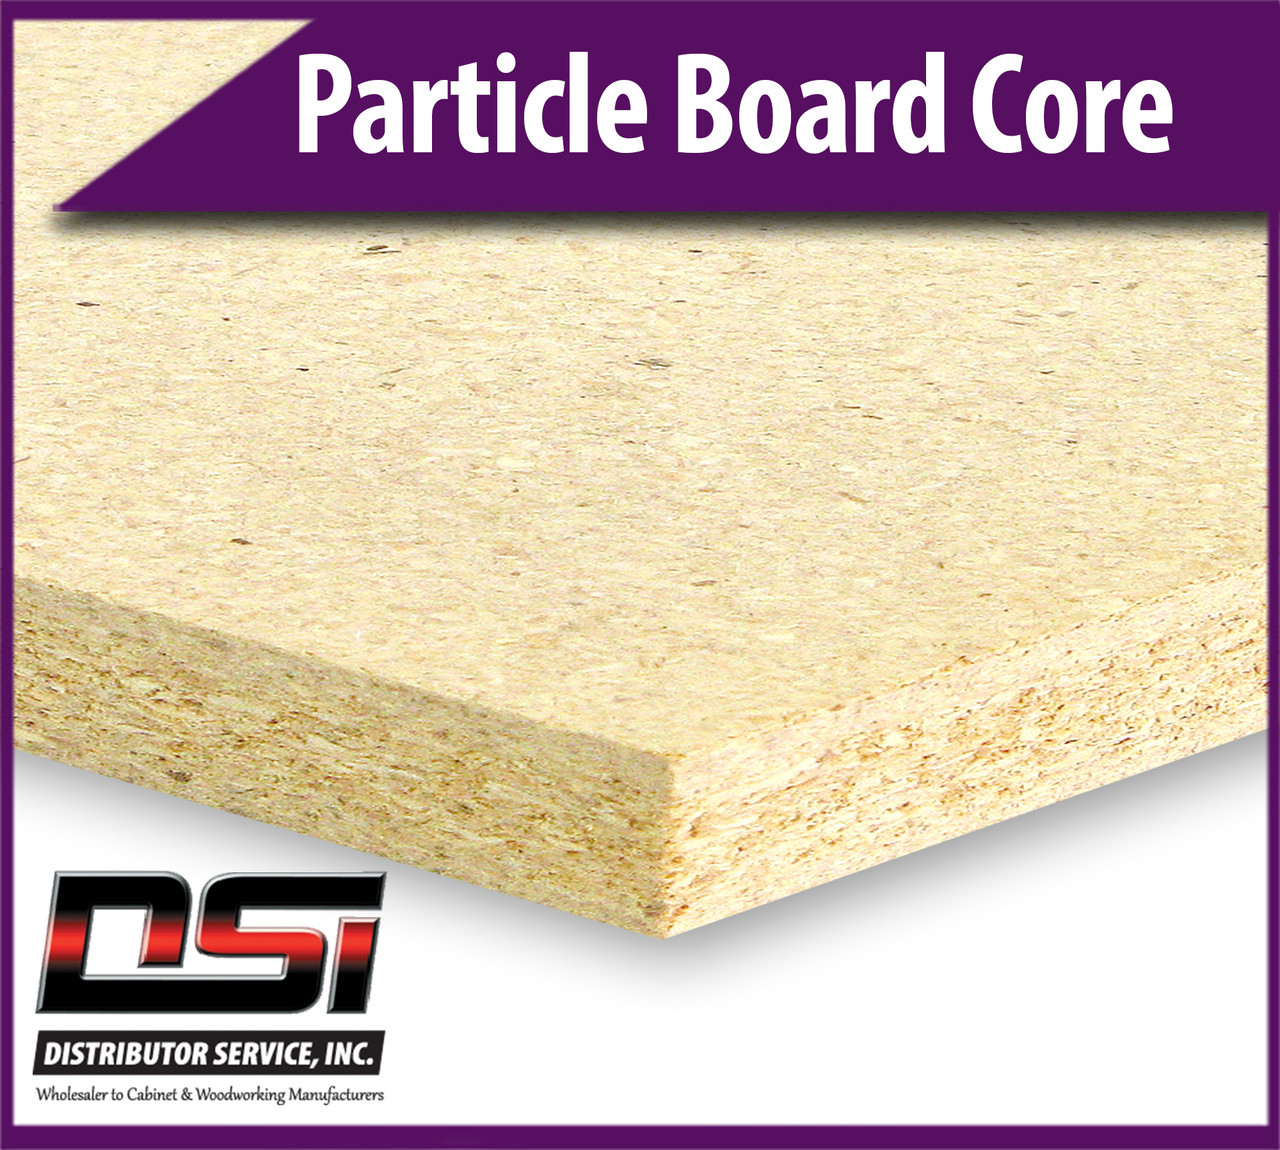 Particle Board Core 1" x 61" x 121" Industrial Particleboard Panels